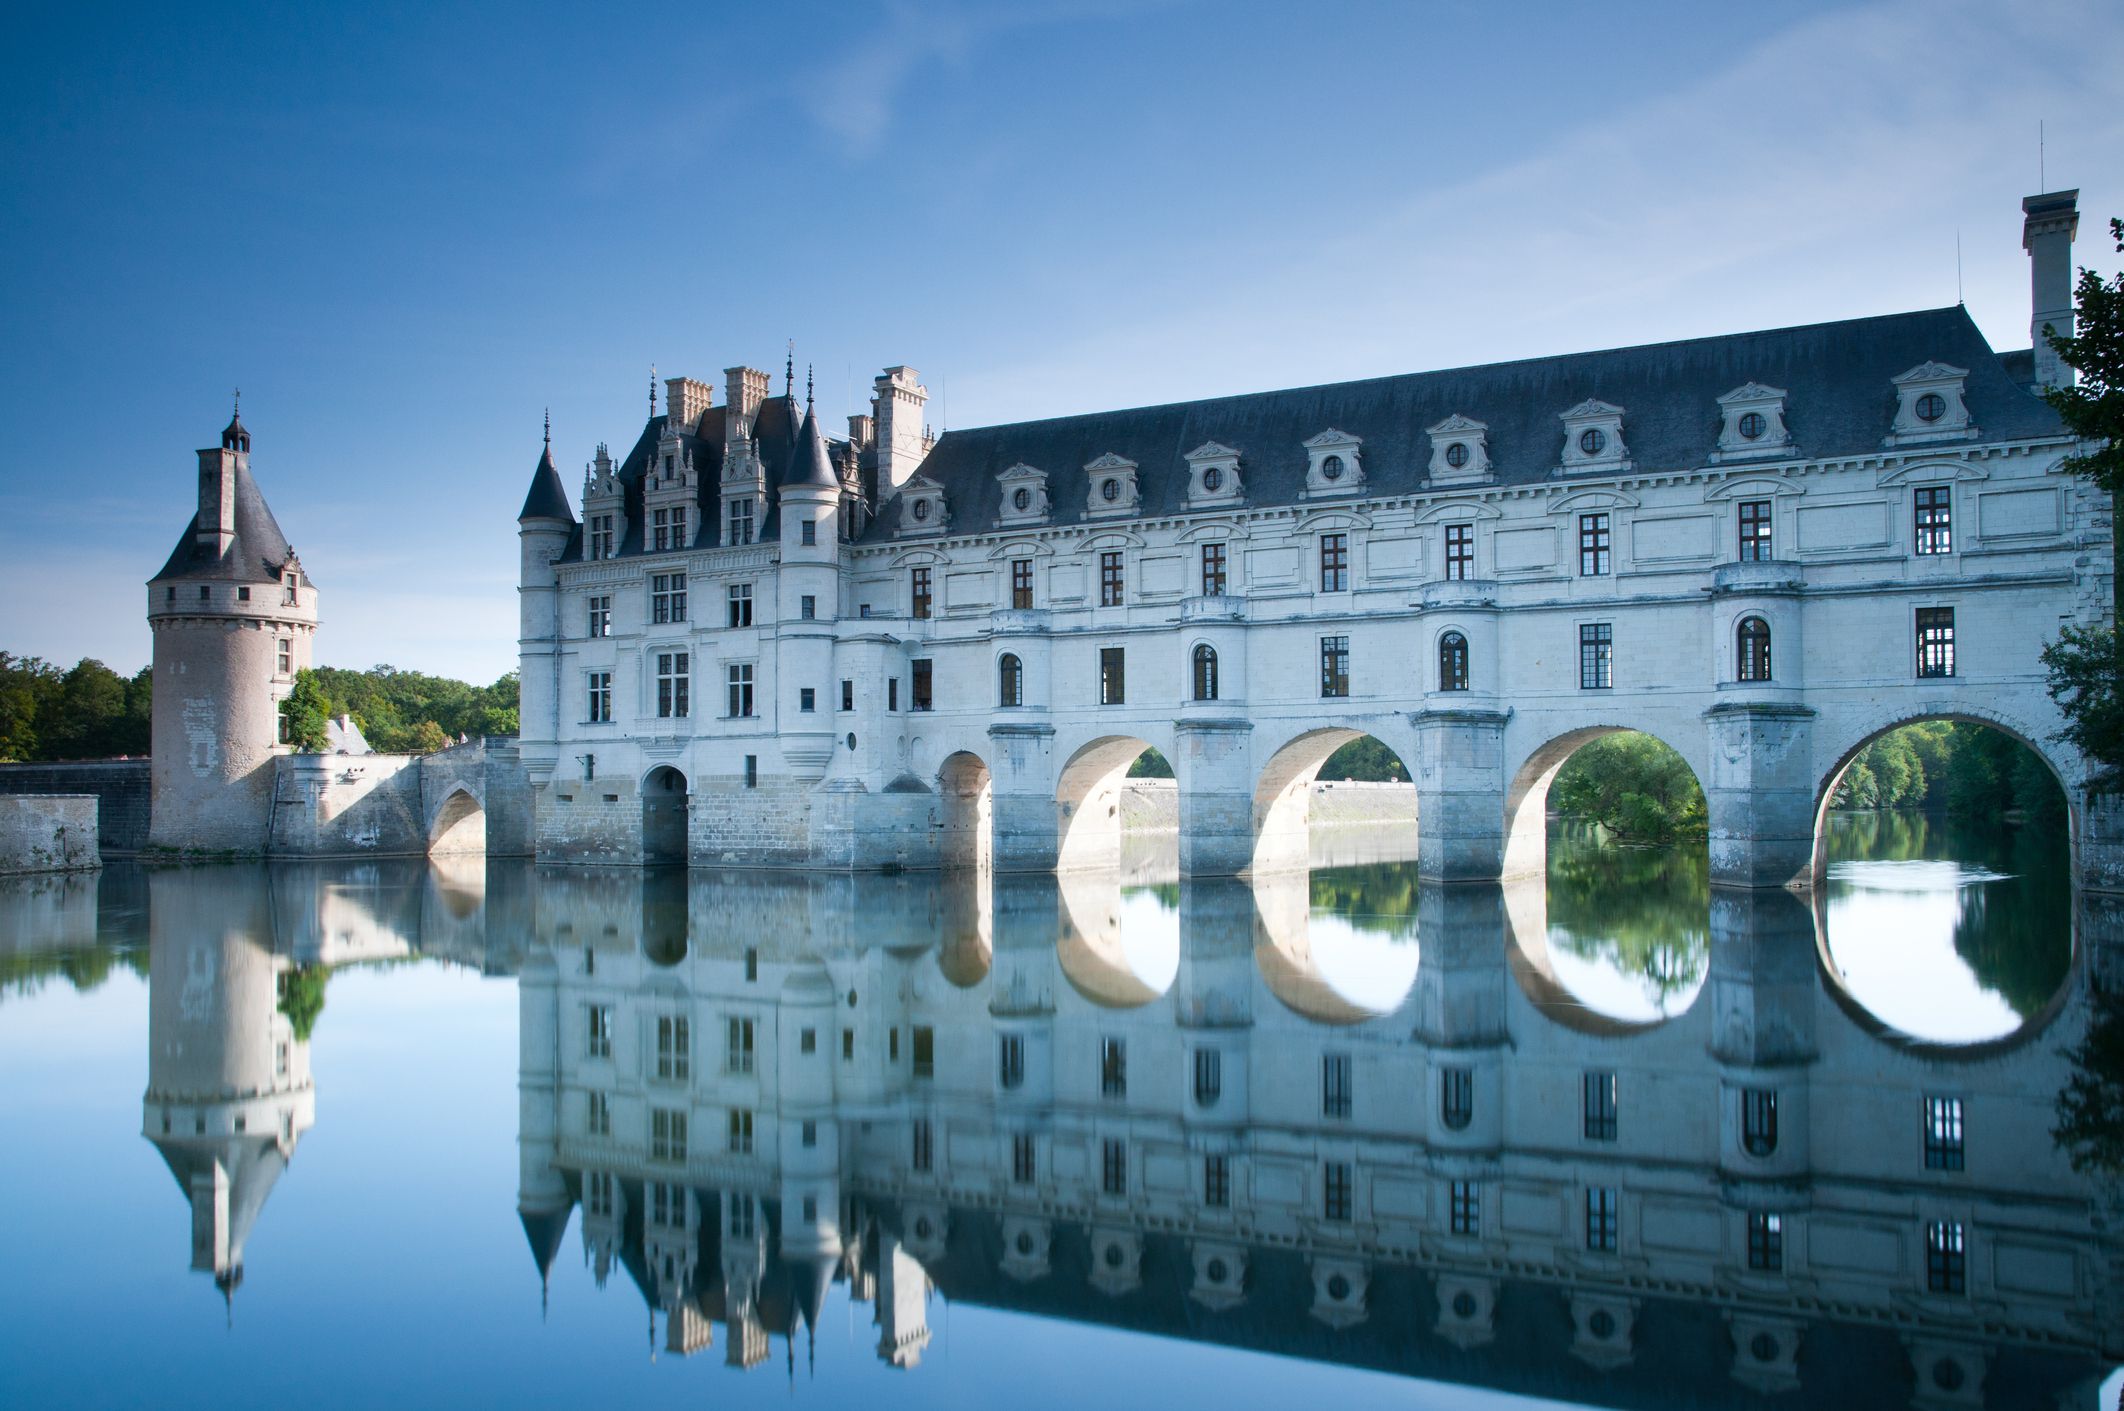 <p>Loire Valley’s Castle of Chenonceau, pictured here, is just one of the many reasons why this French destination is on our list. Loire Valley is also home to Leondardo da Vinci’s The Last Supper and other famous works at Chateau du Clos Luce. </p>